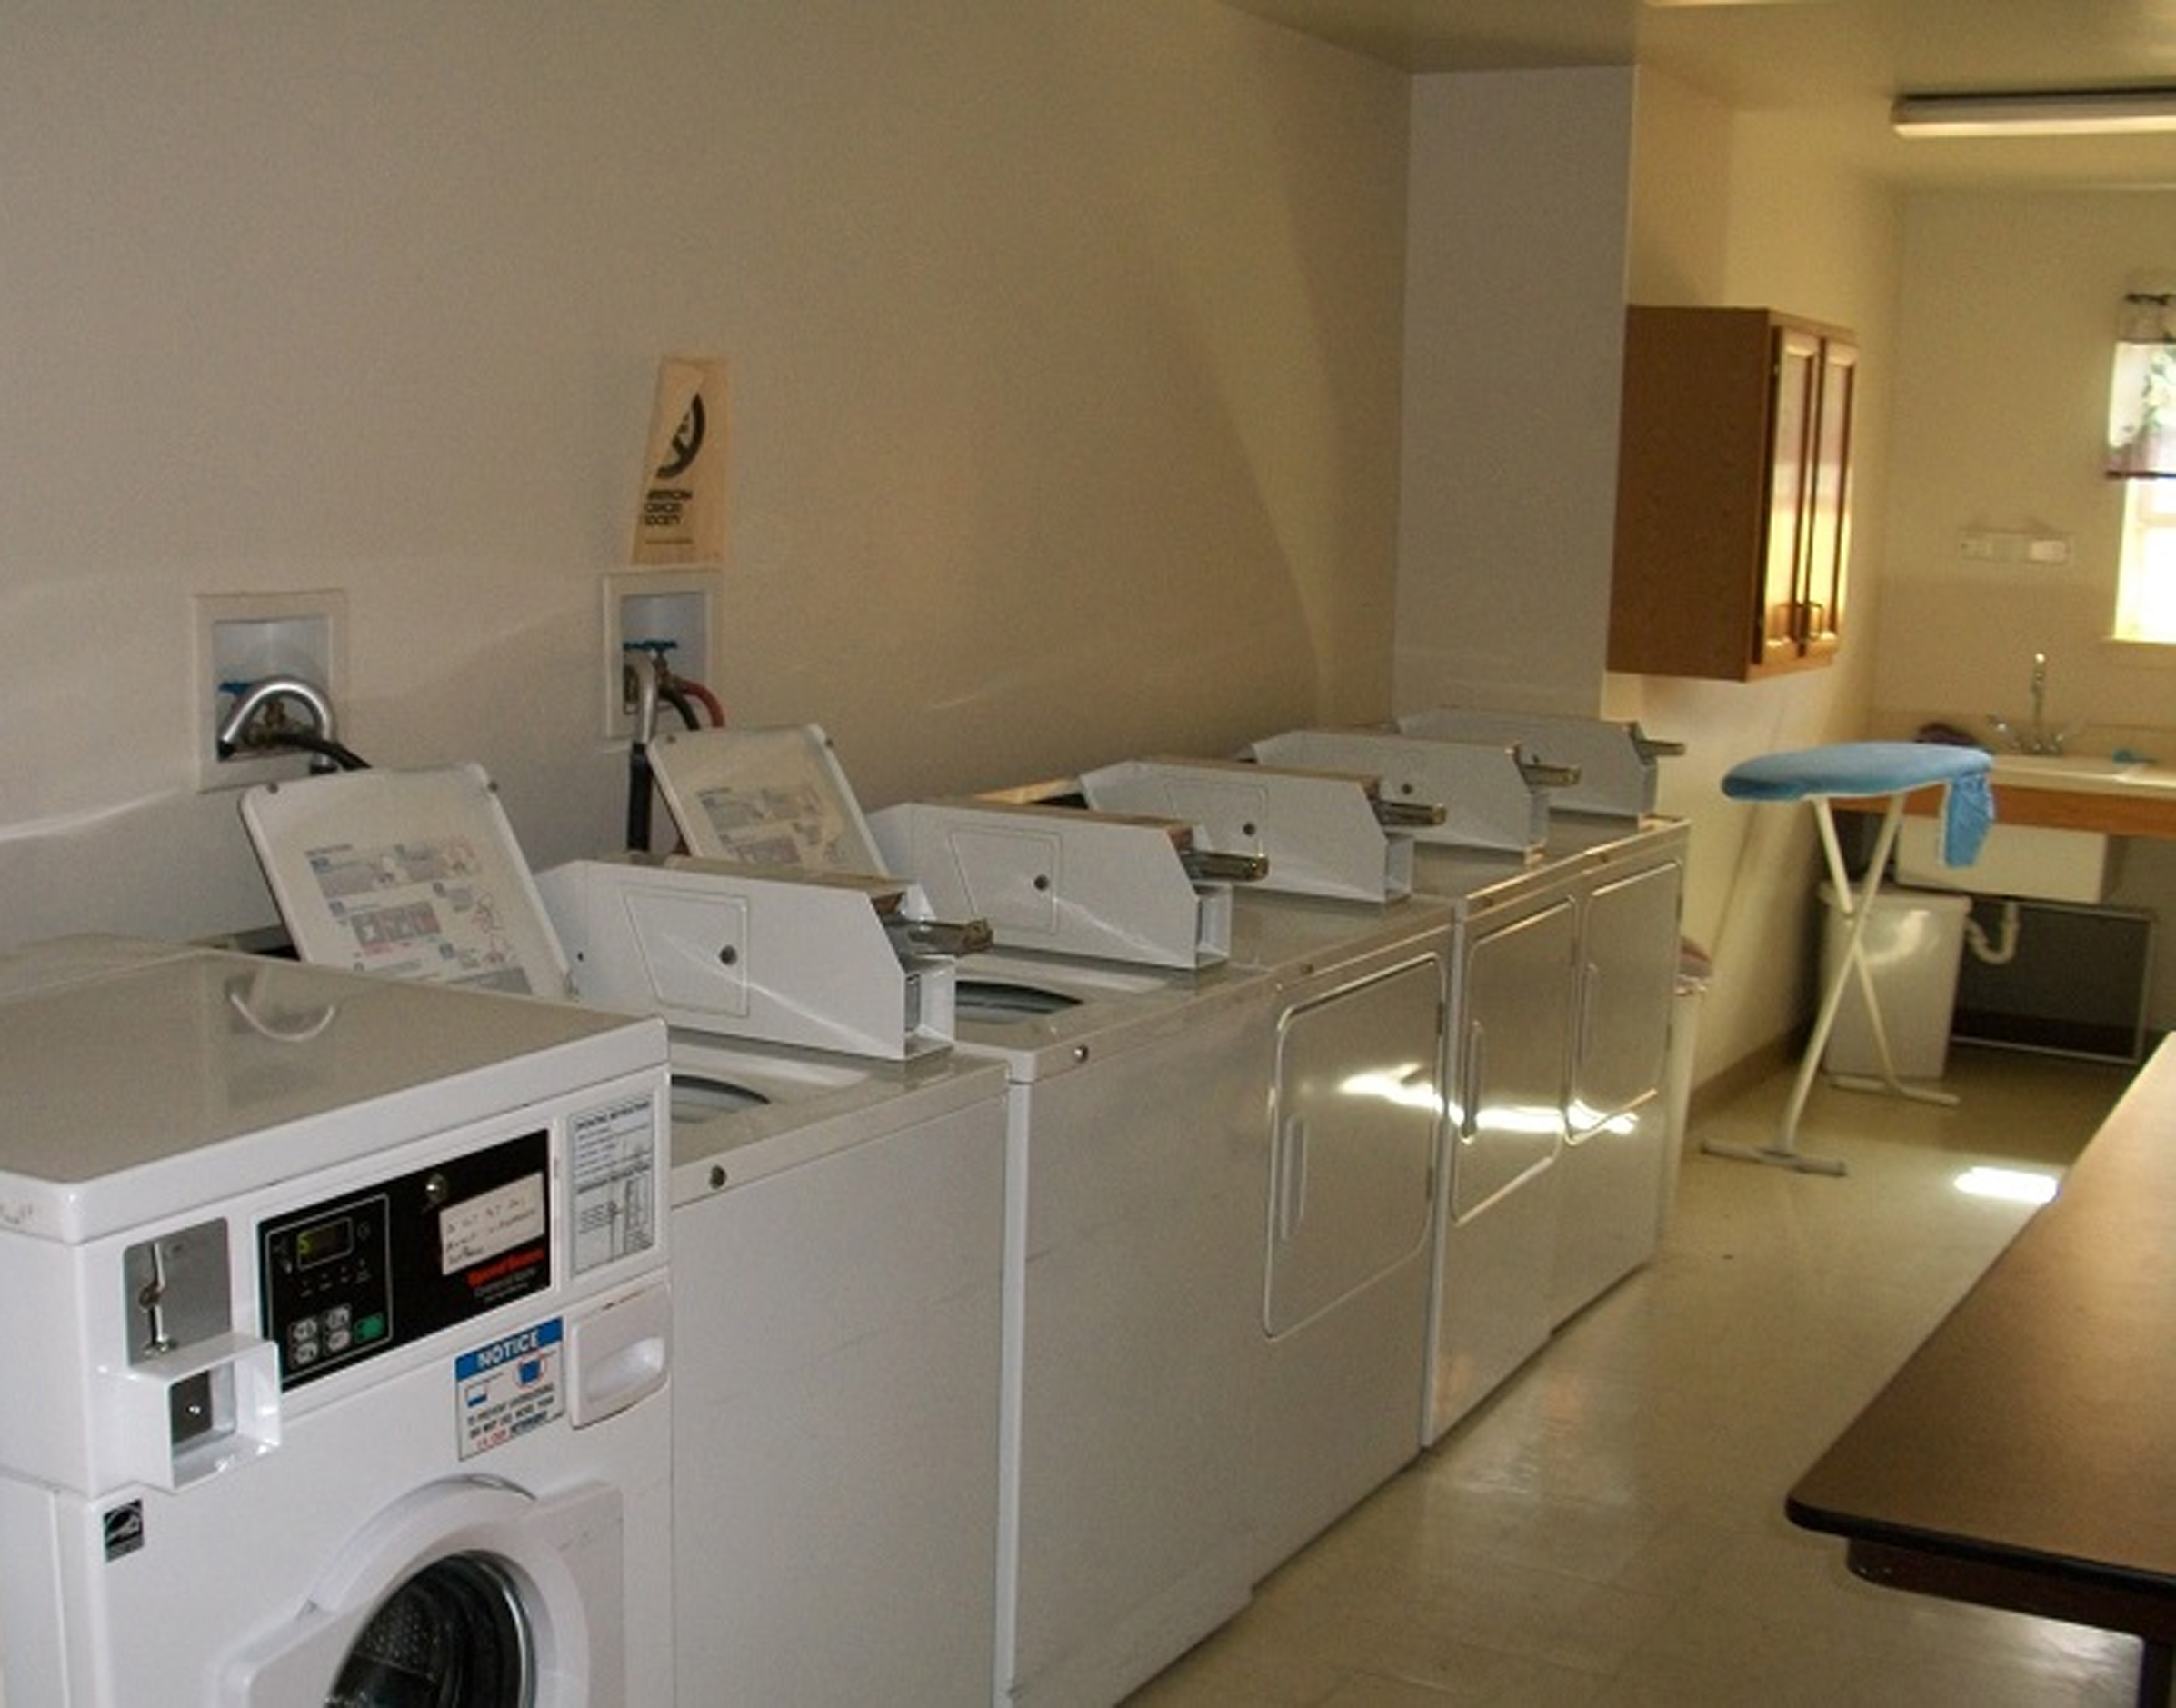 property management company client list syracuse ny community laundry room image of wellsville wood apartments